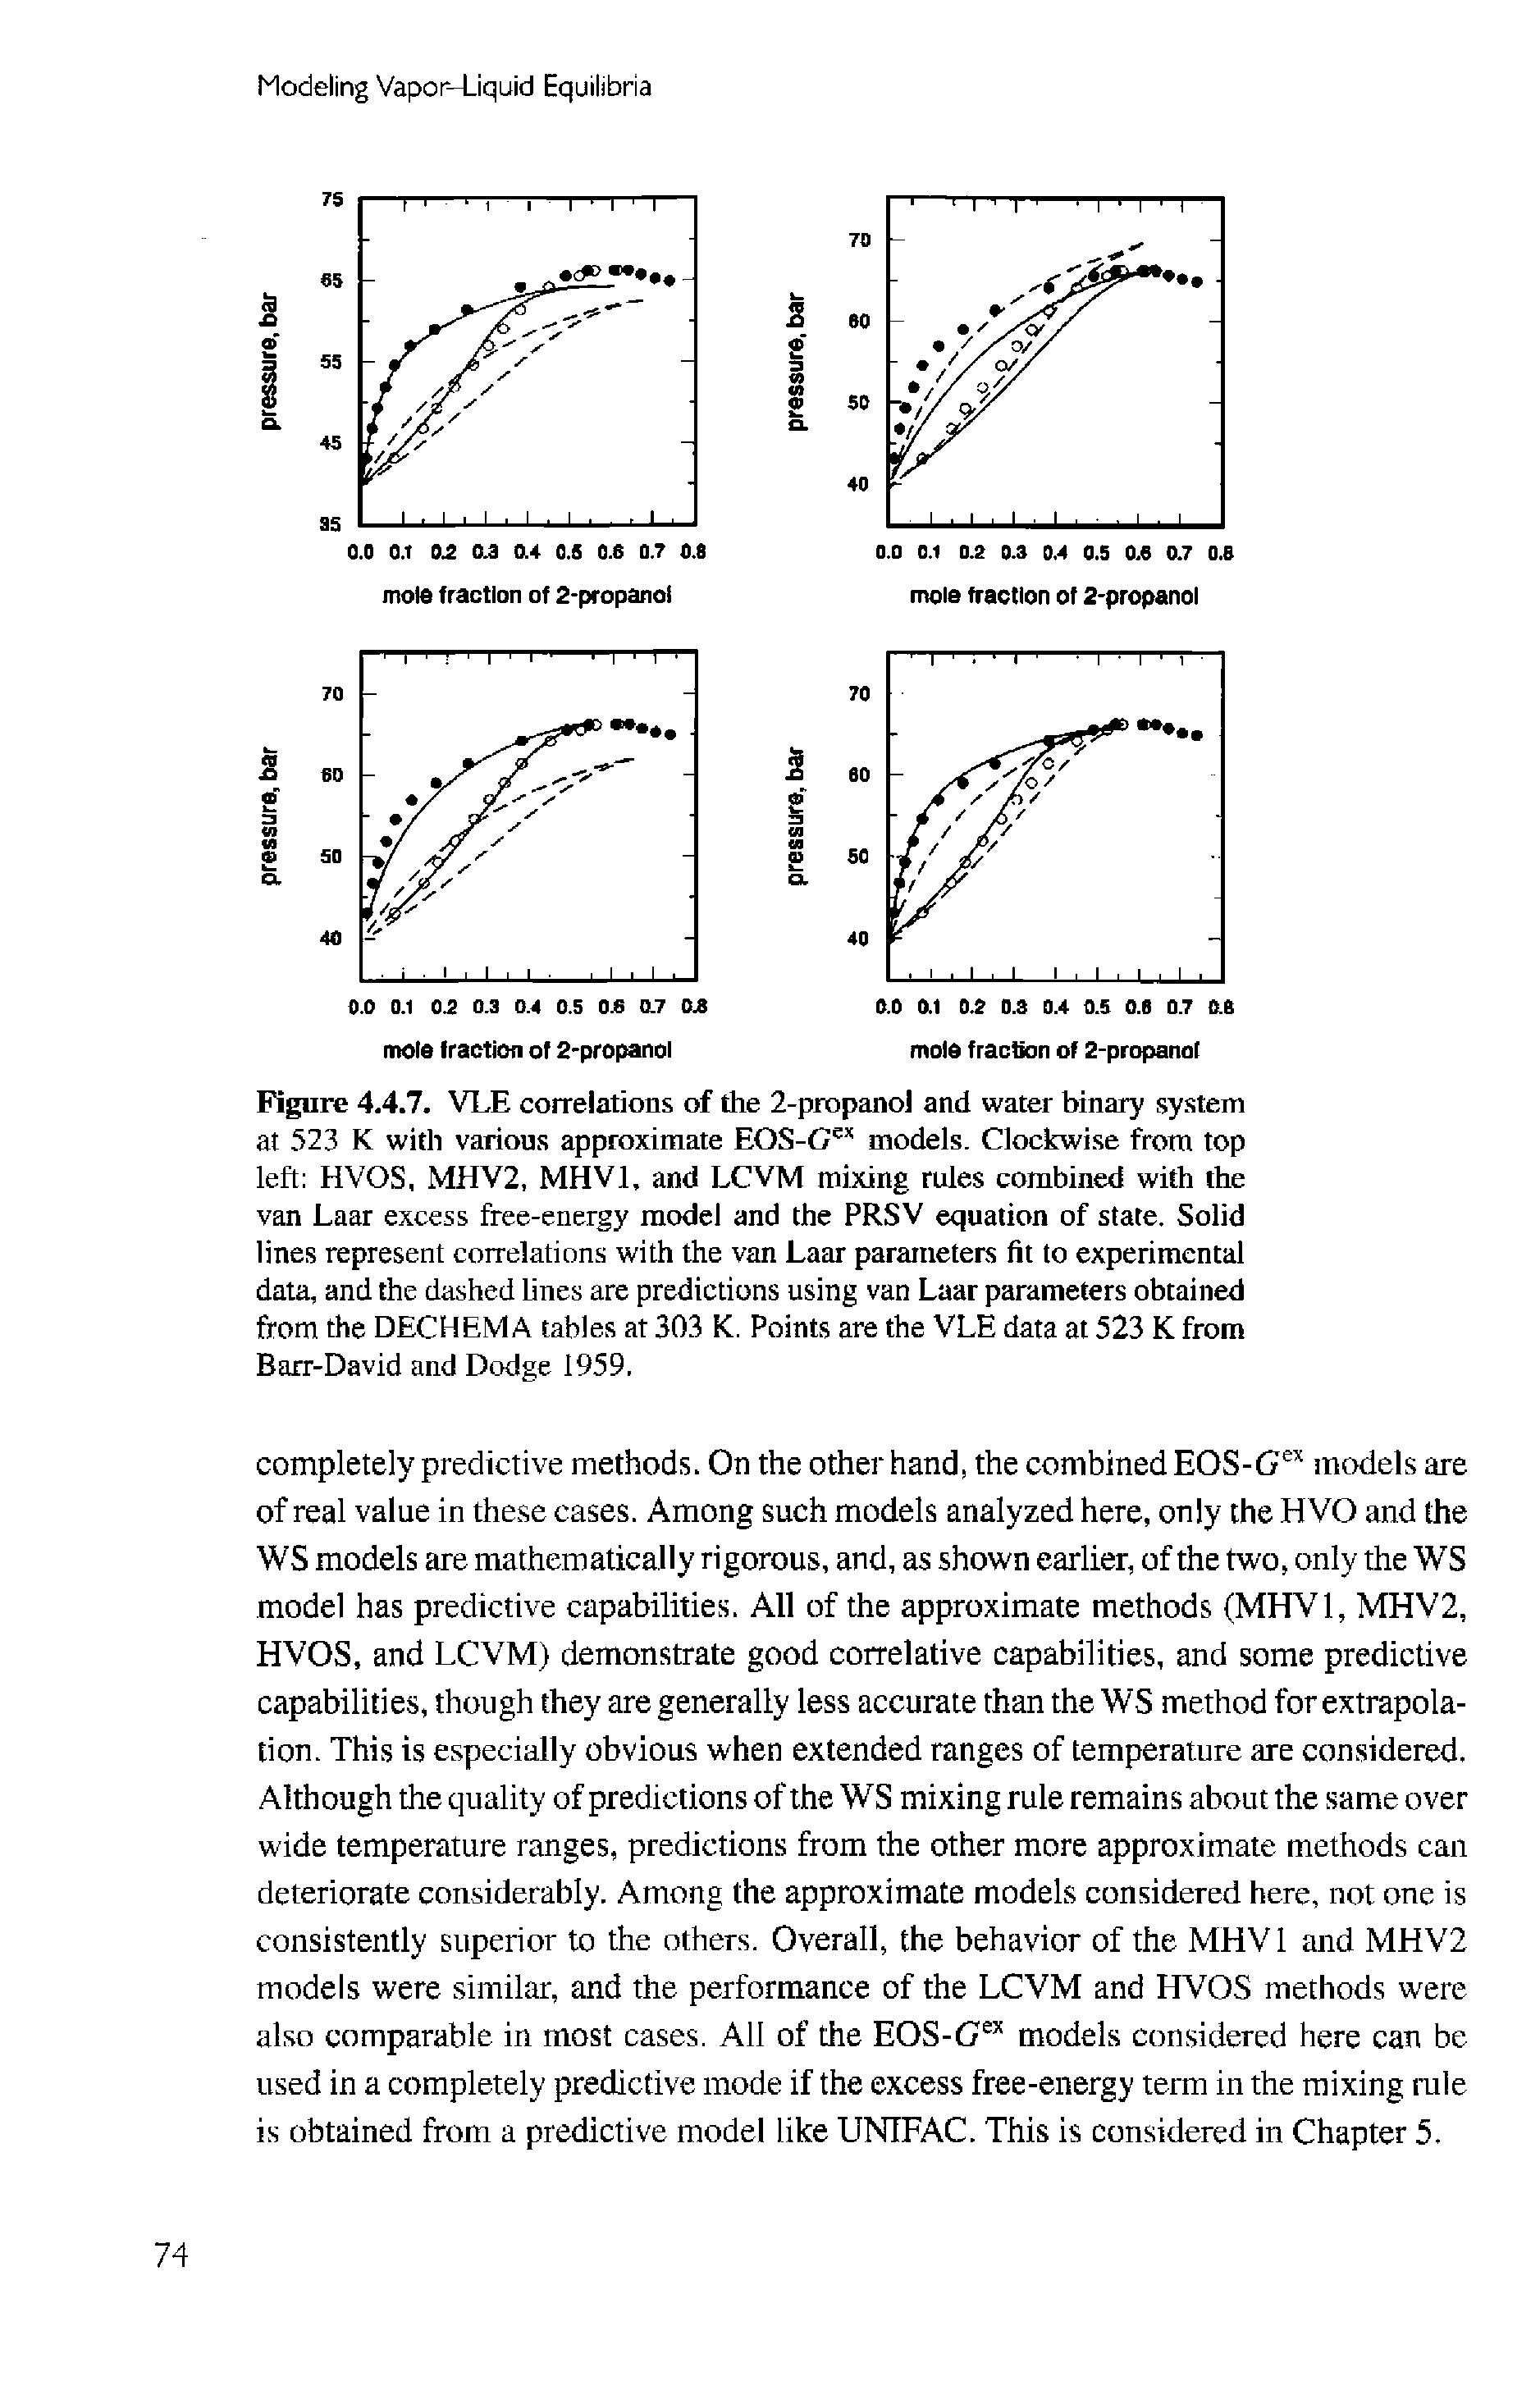 Figure 4.4.7. VLE correlations of the 2-propanol and water binary system at 523 K with various approximate EOS-C models. Clockwise from top left HVOS, MHV2, MHVl, and LCVM mixing rules combined with the van Laar excess free-energy model and the PRSV equation of state. Solid lines represent correlations with the van Laar parameters fit to experimental data, and the dashed hnes are predictions using van Laar parameters obtained from the DECHEMA tables at 303 K. Points are the VLE data at 523 K from Barr-David and Dodge 1959,...